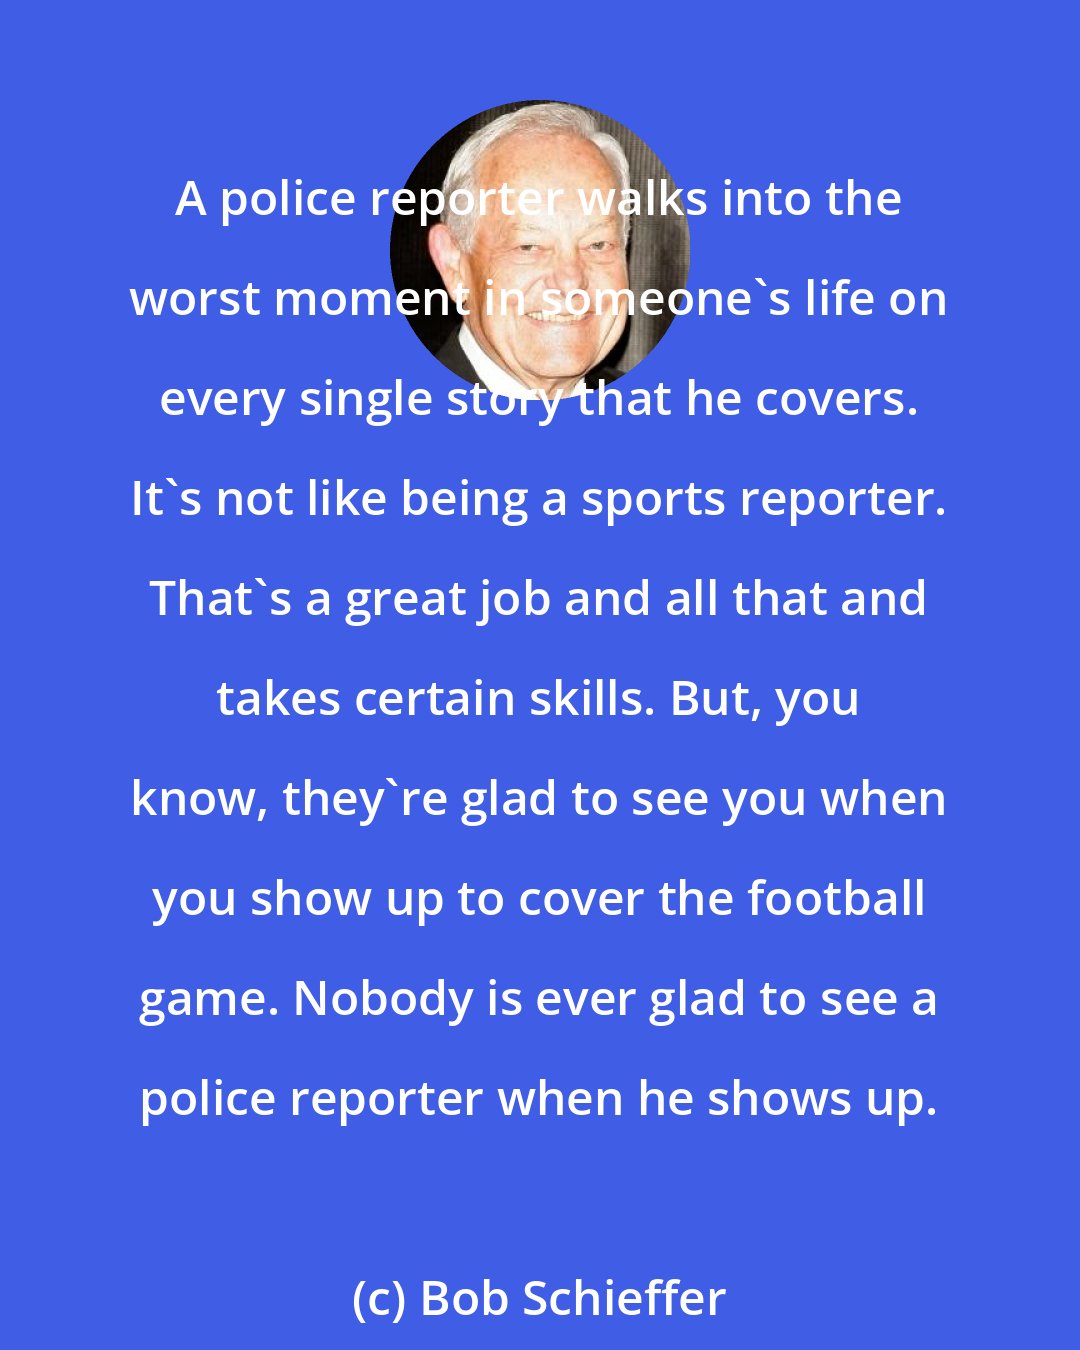 Bob Schieffer: A police reporter walks into the worst moment in someone's life on every single story that he covers. It's not like being a sports reporter. That's a great job and all that and takes certain skills. But, you know, they're glad to see you when you show up to cover the football game. Nobody is ever glad to see a police reporter when he shows up.